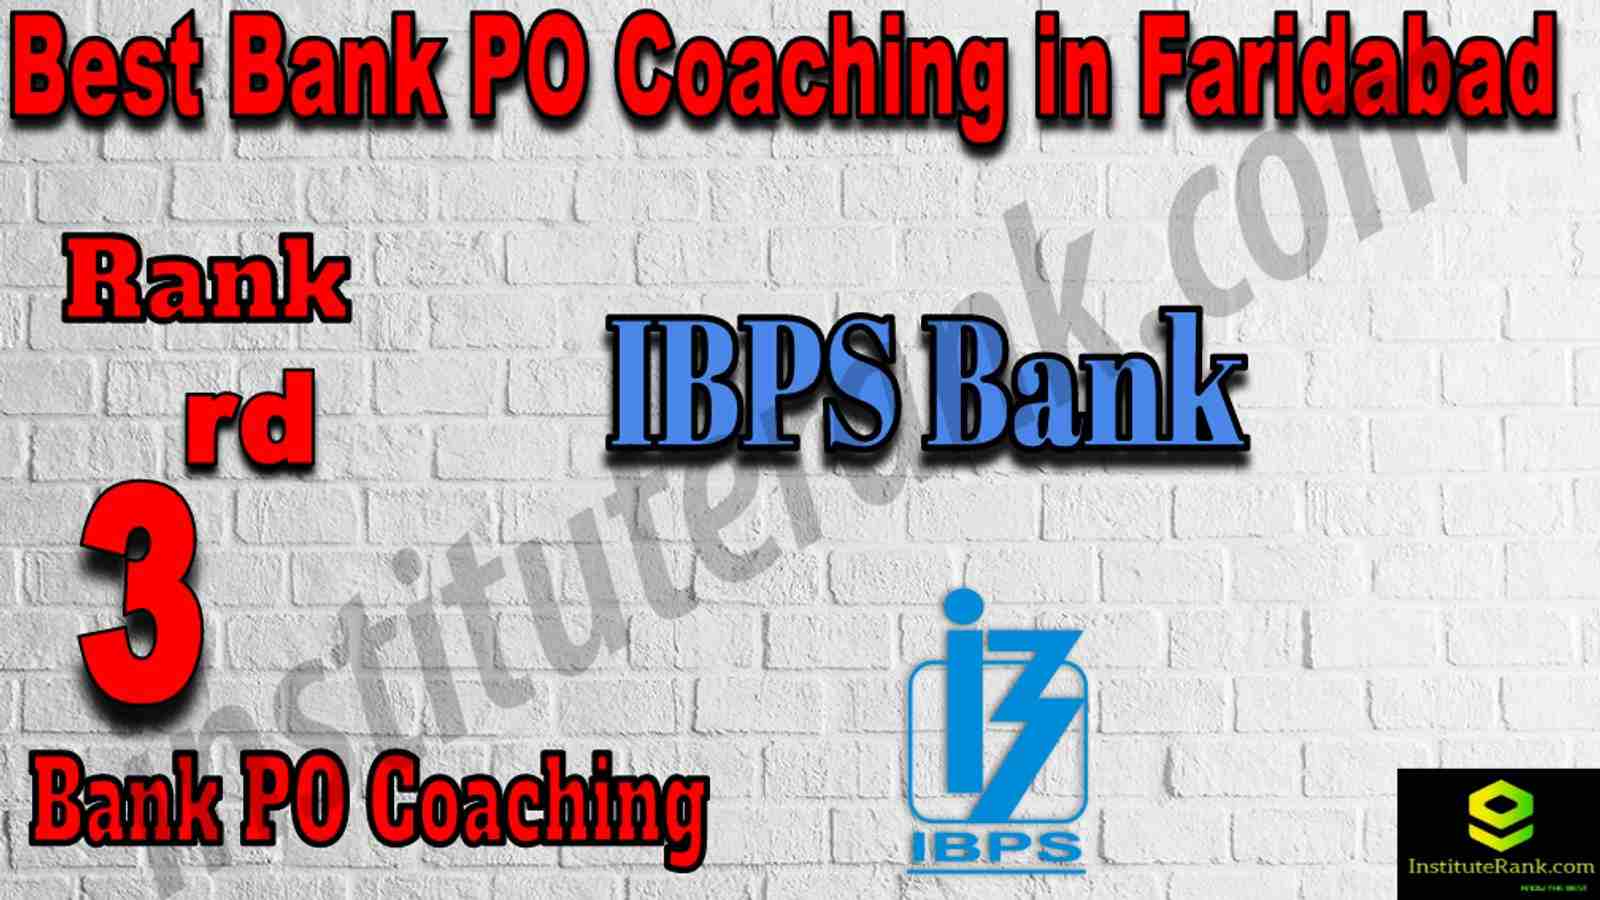 3rd Best Bank PO Coaching in Faridabad